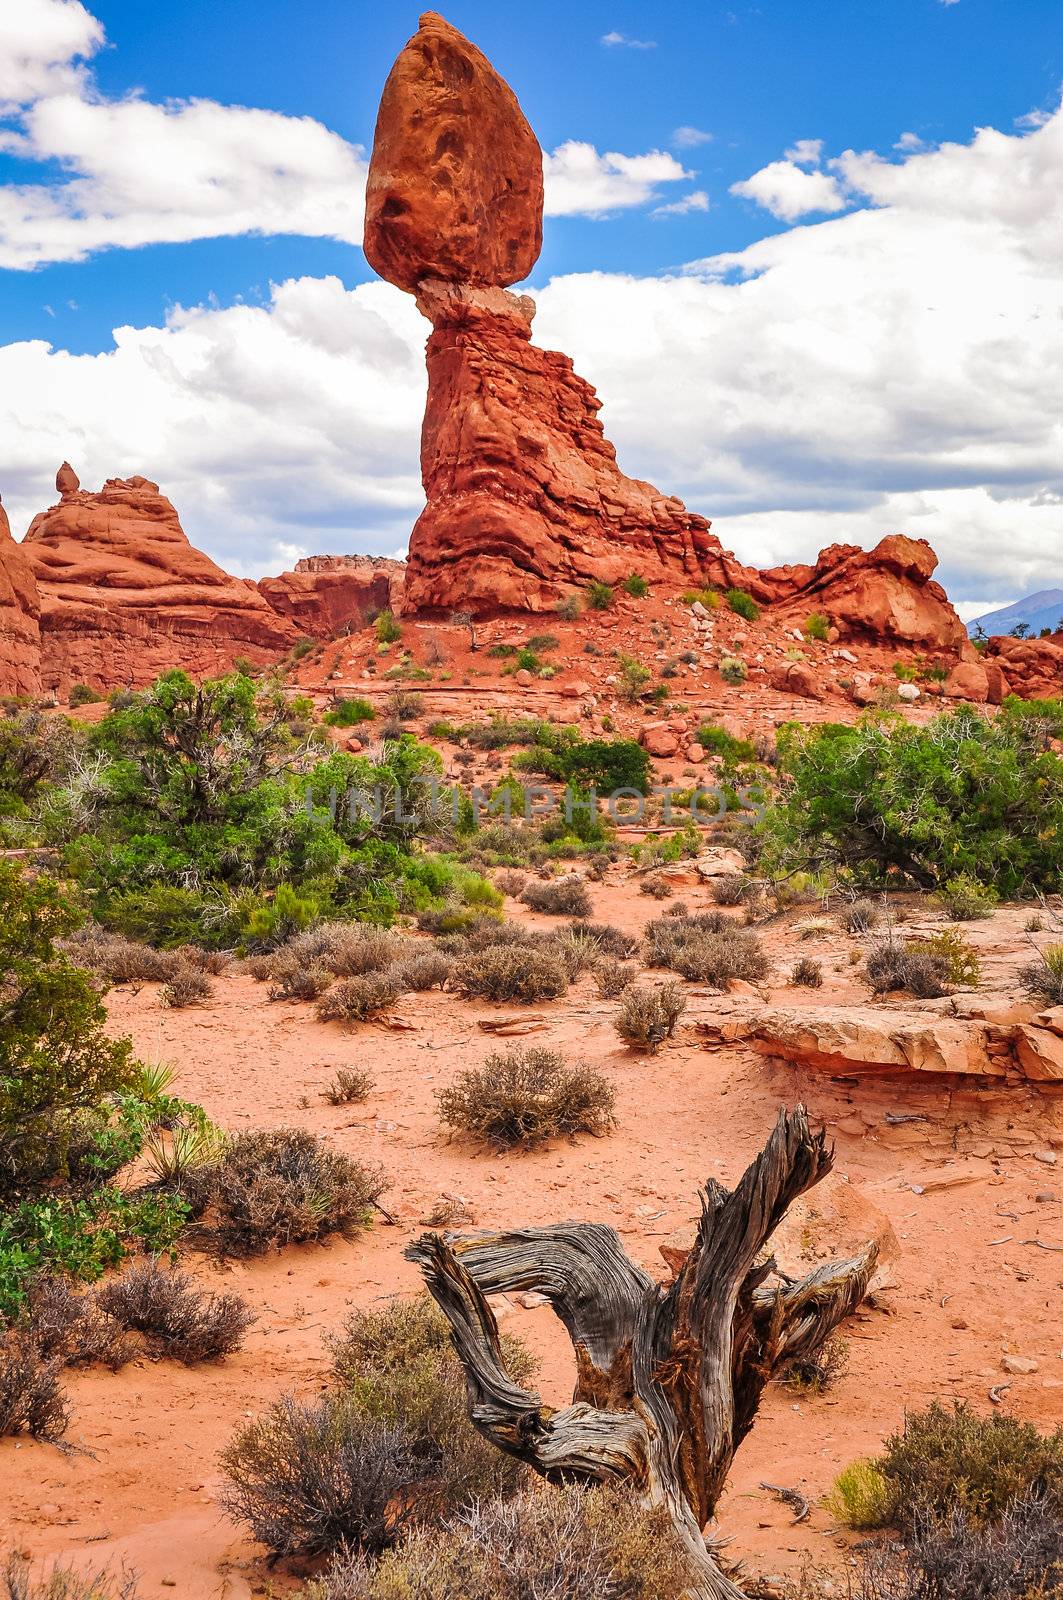 Balanced rock in Arches National Park, Utah, USA